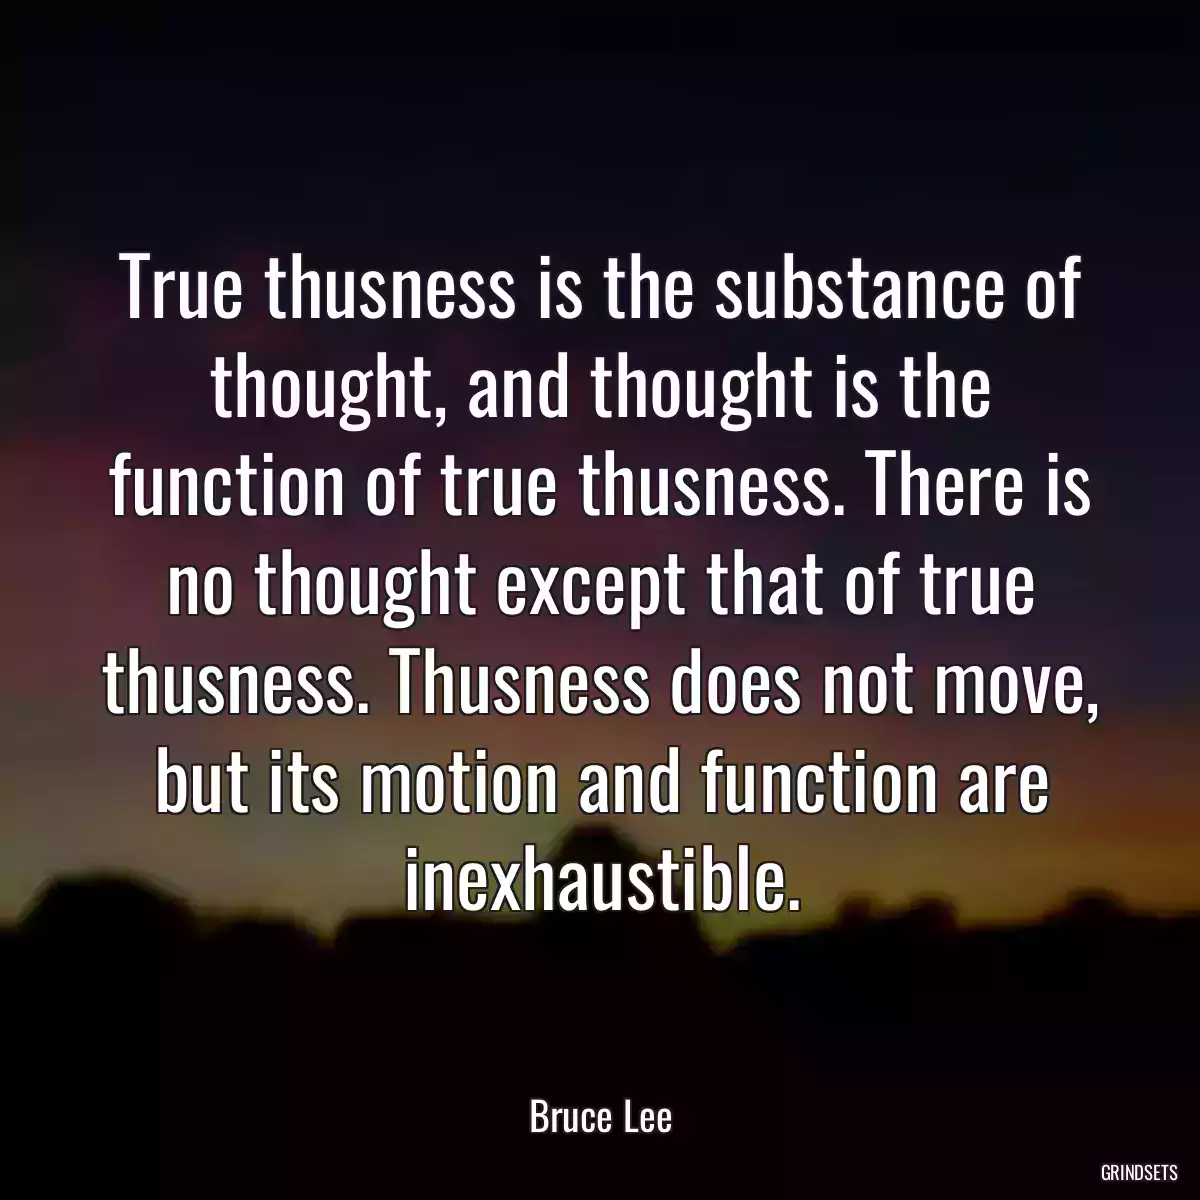 True thusness is the substance of thought, and thought is the function of true thusness. There is no thought except that of true thusness. Thusness does not move, but its motion and function are inexhaustible.